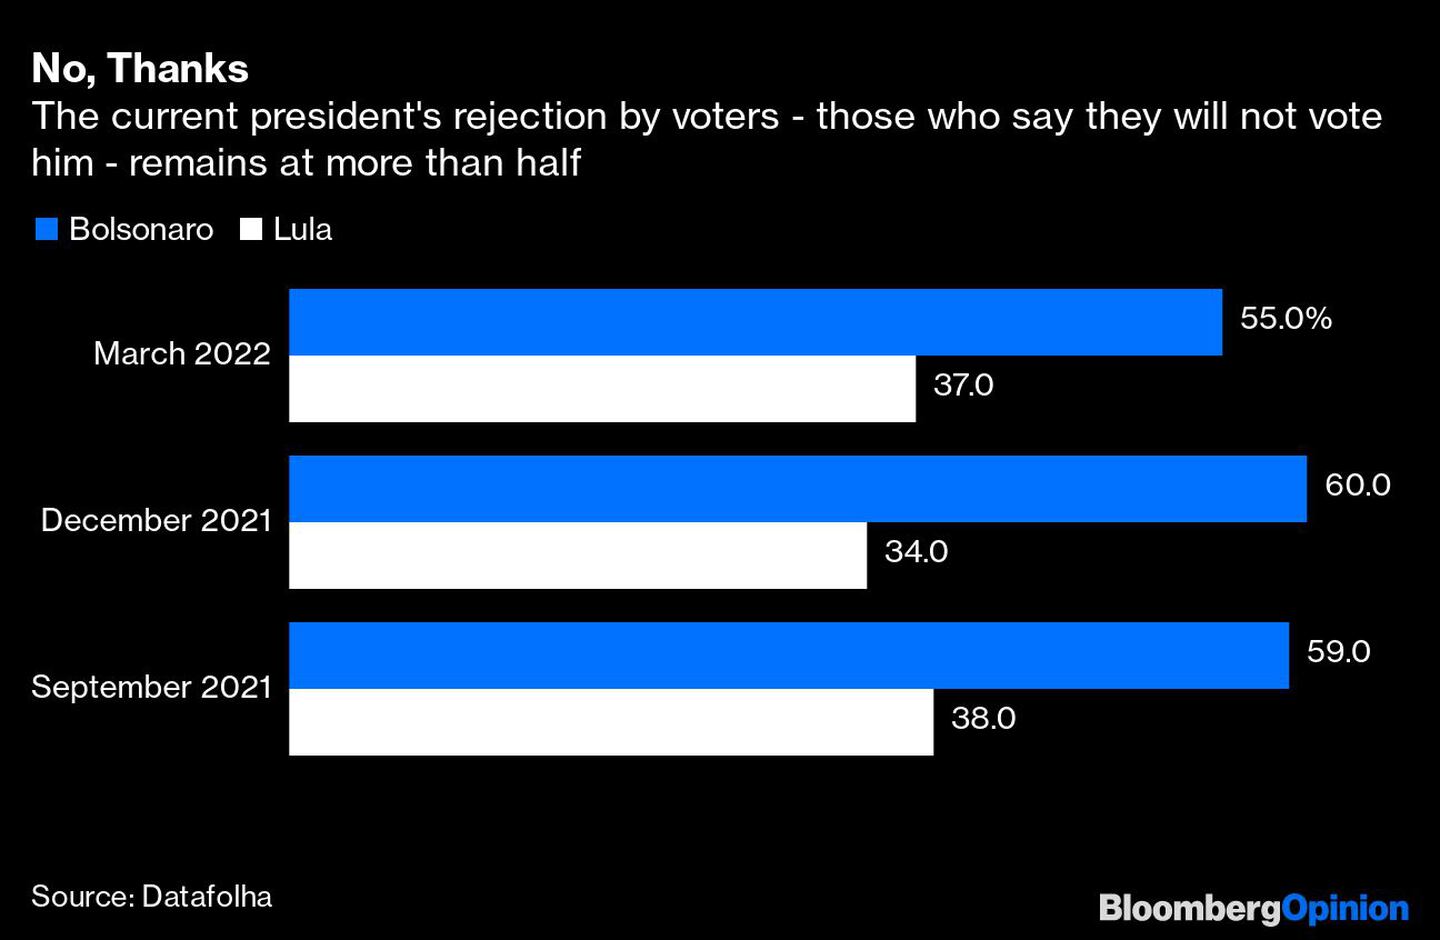 No, Thanks | The current president's rejection by voters - those who say they will not vote him - remains at more than halfdfd